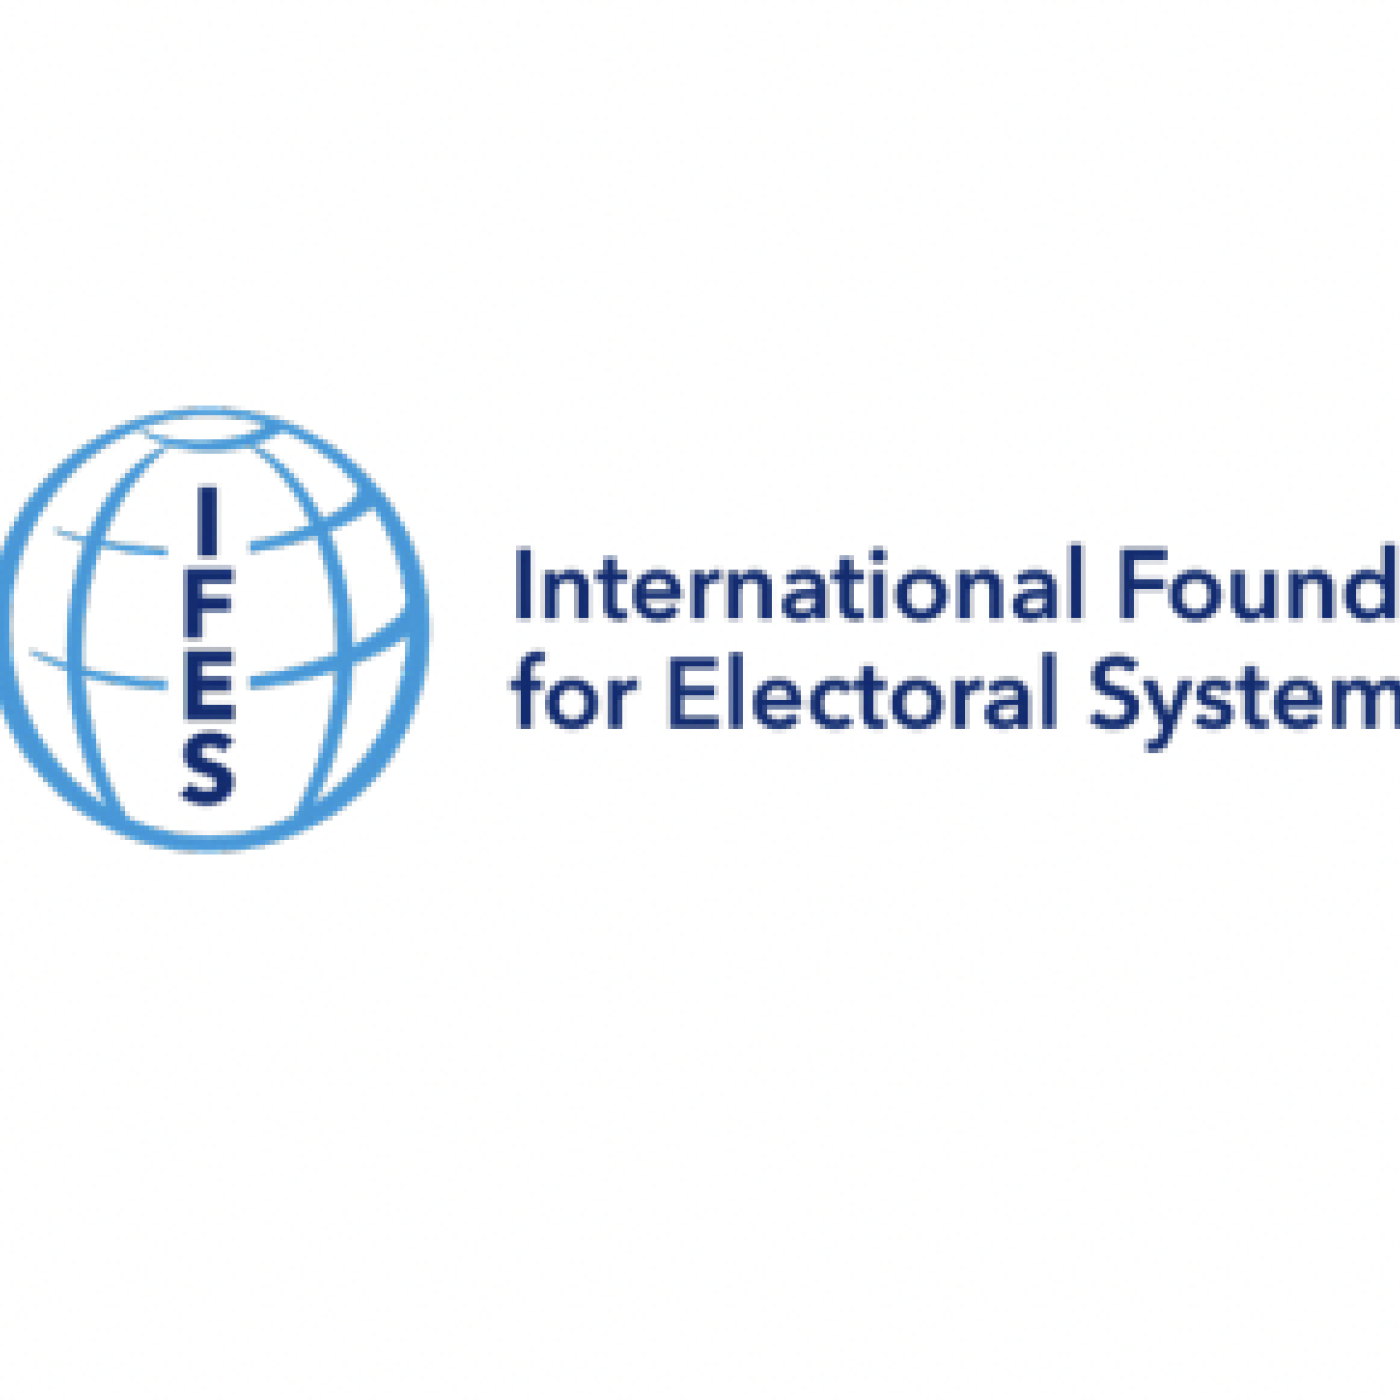 USAID, CEPPS and IFES logos in horizontal banner